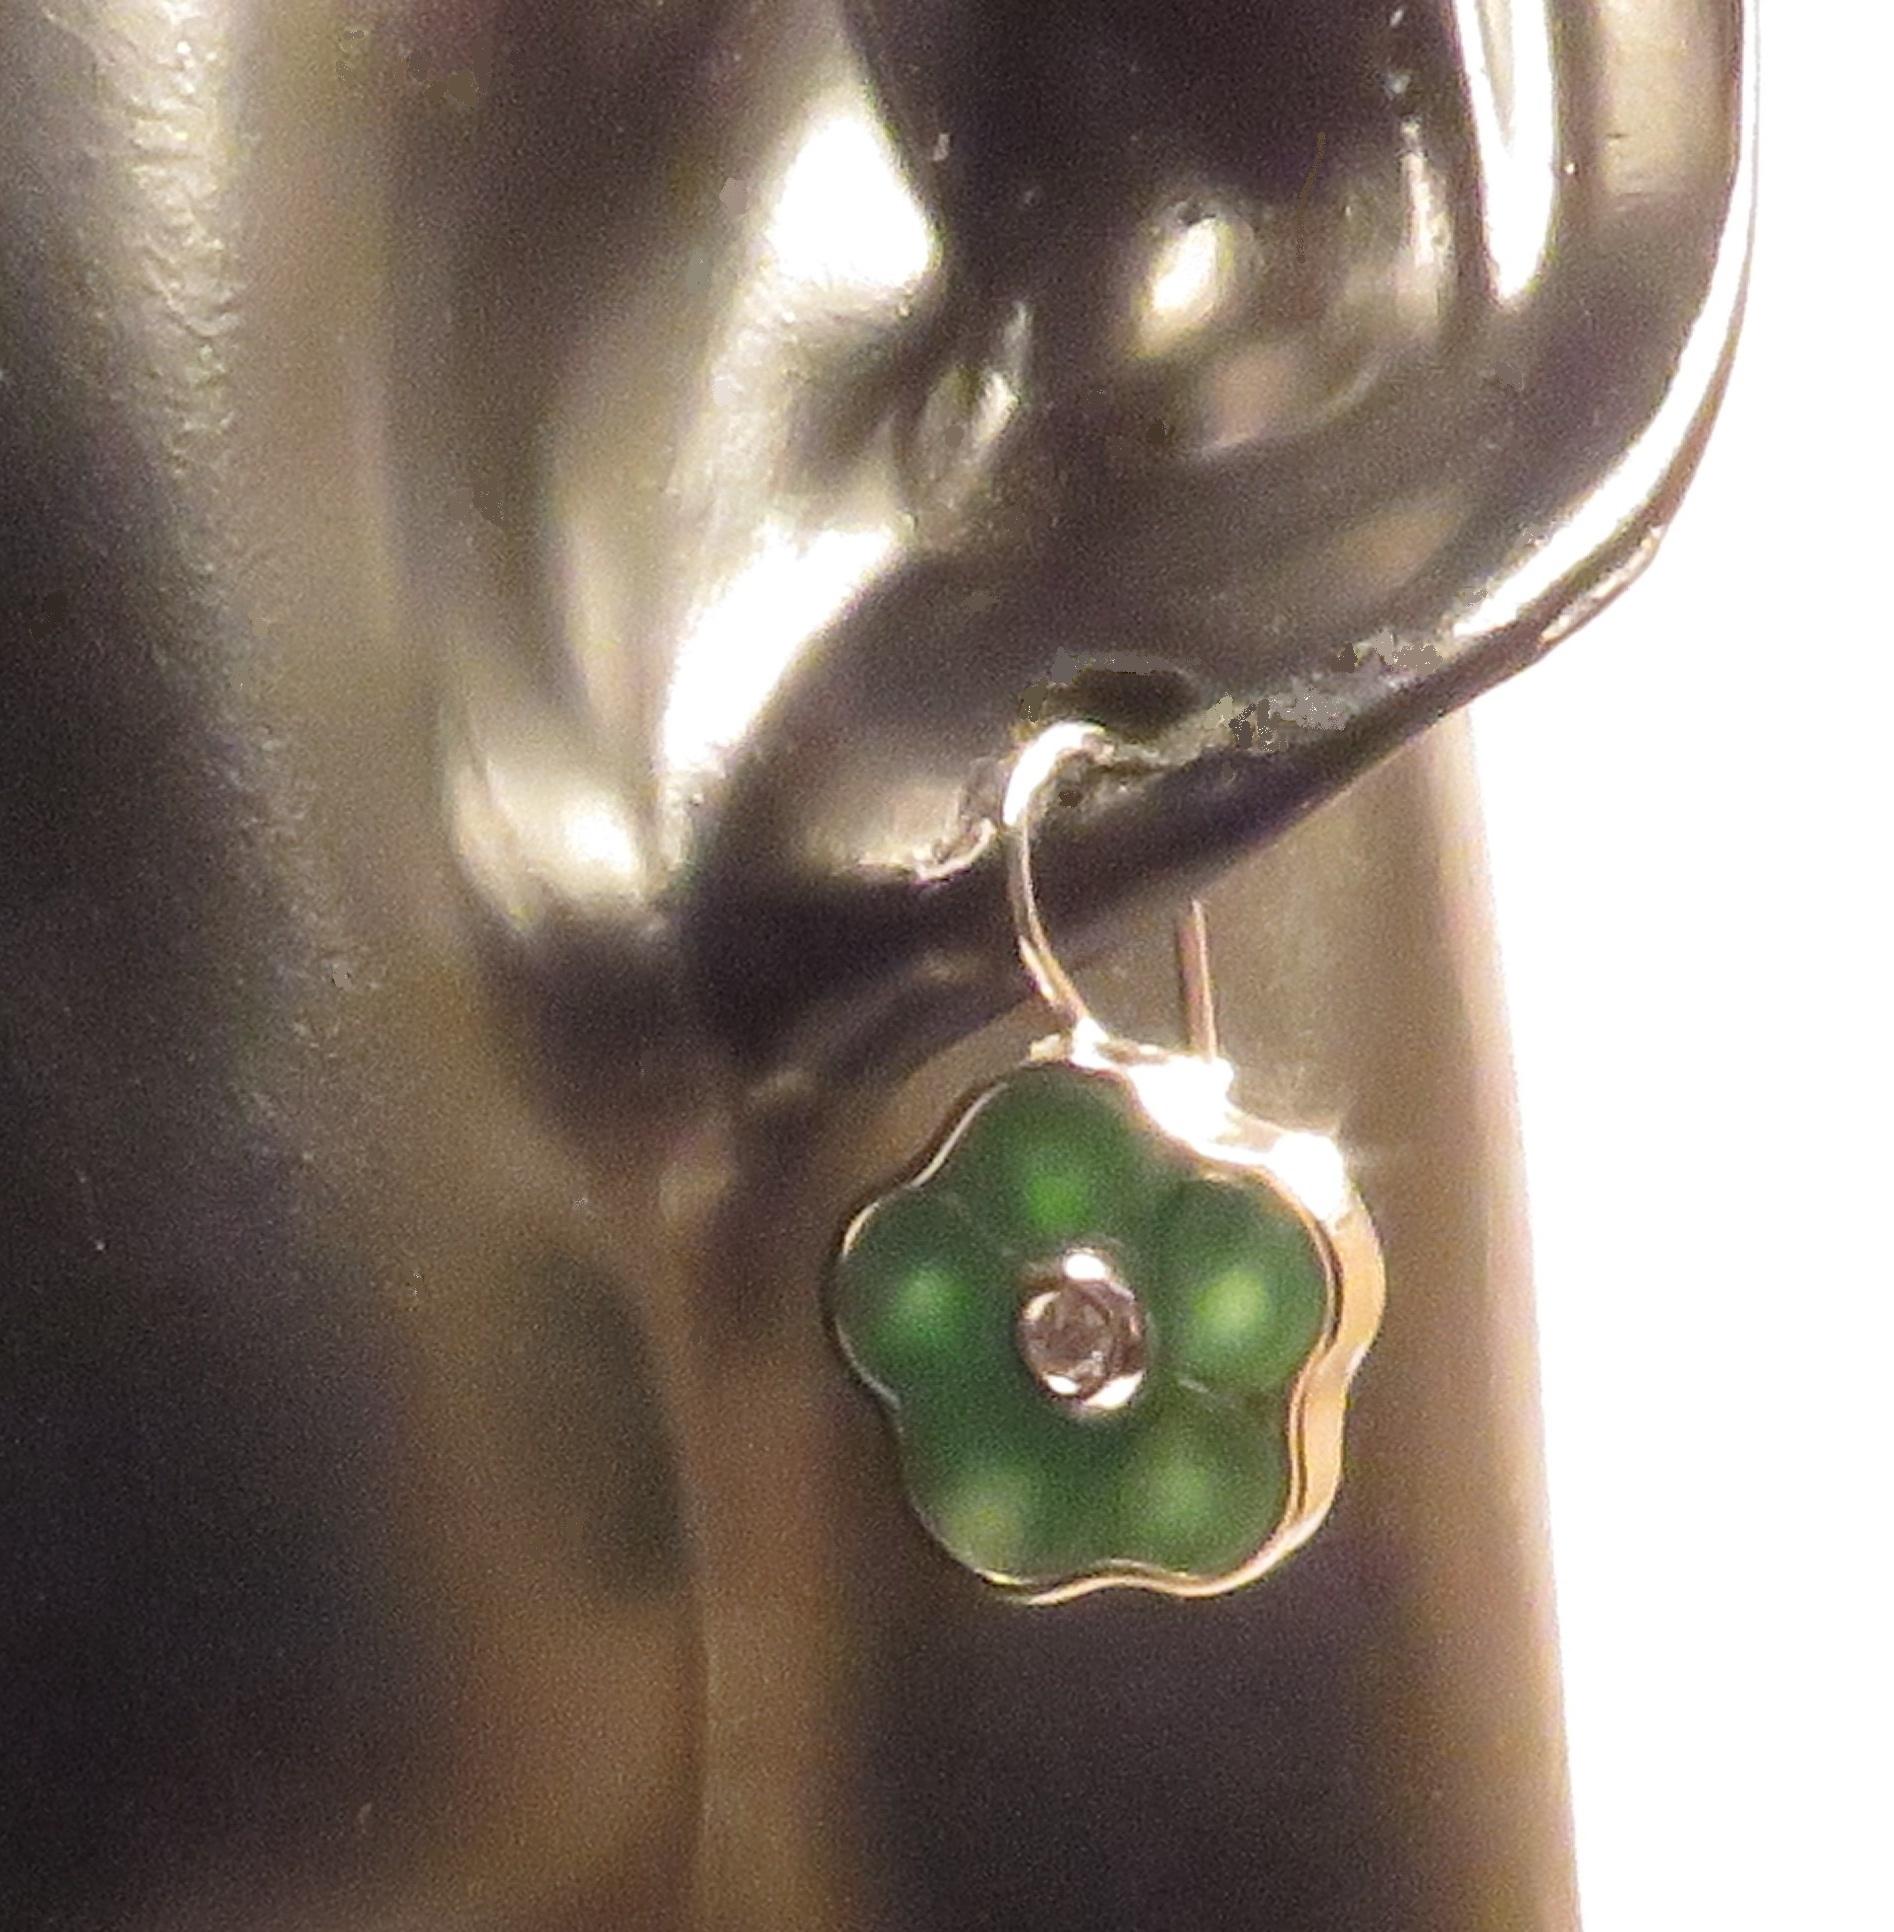 Brilliant Cut Jade Diamonds 18 Karat White Gold Lever-Back Earrings Handcrafted in Italy